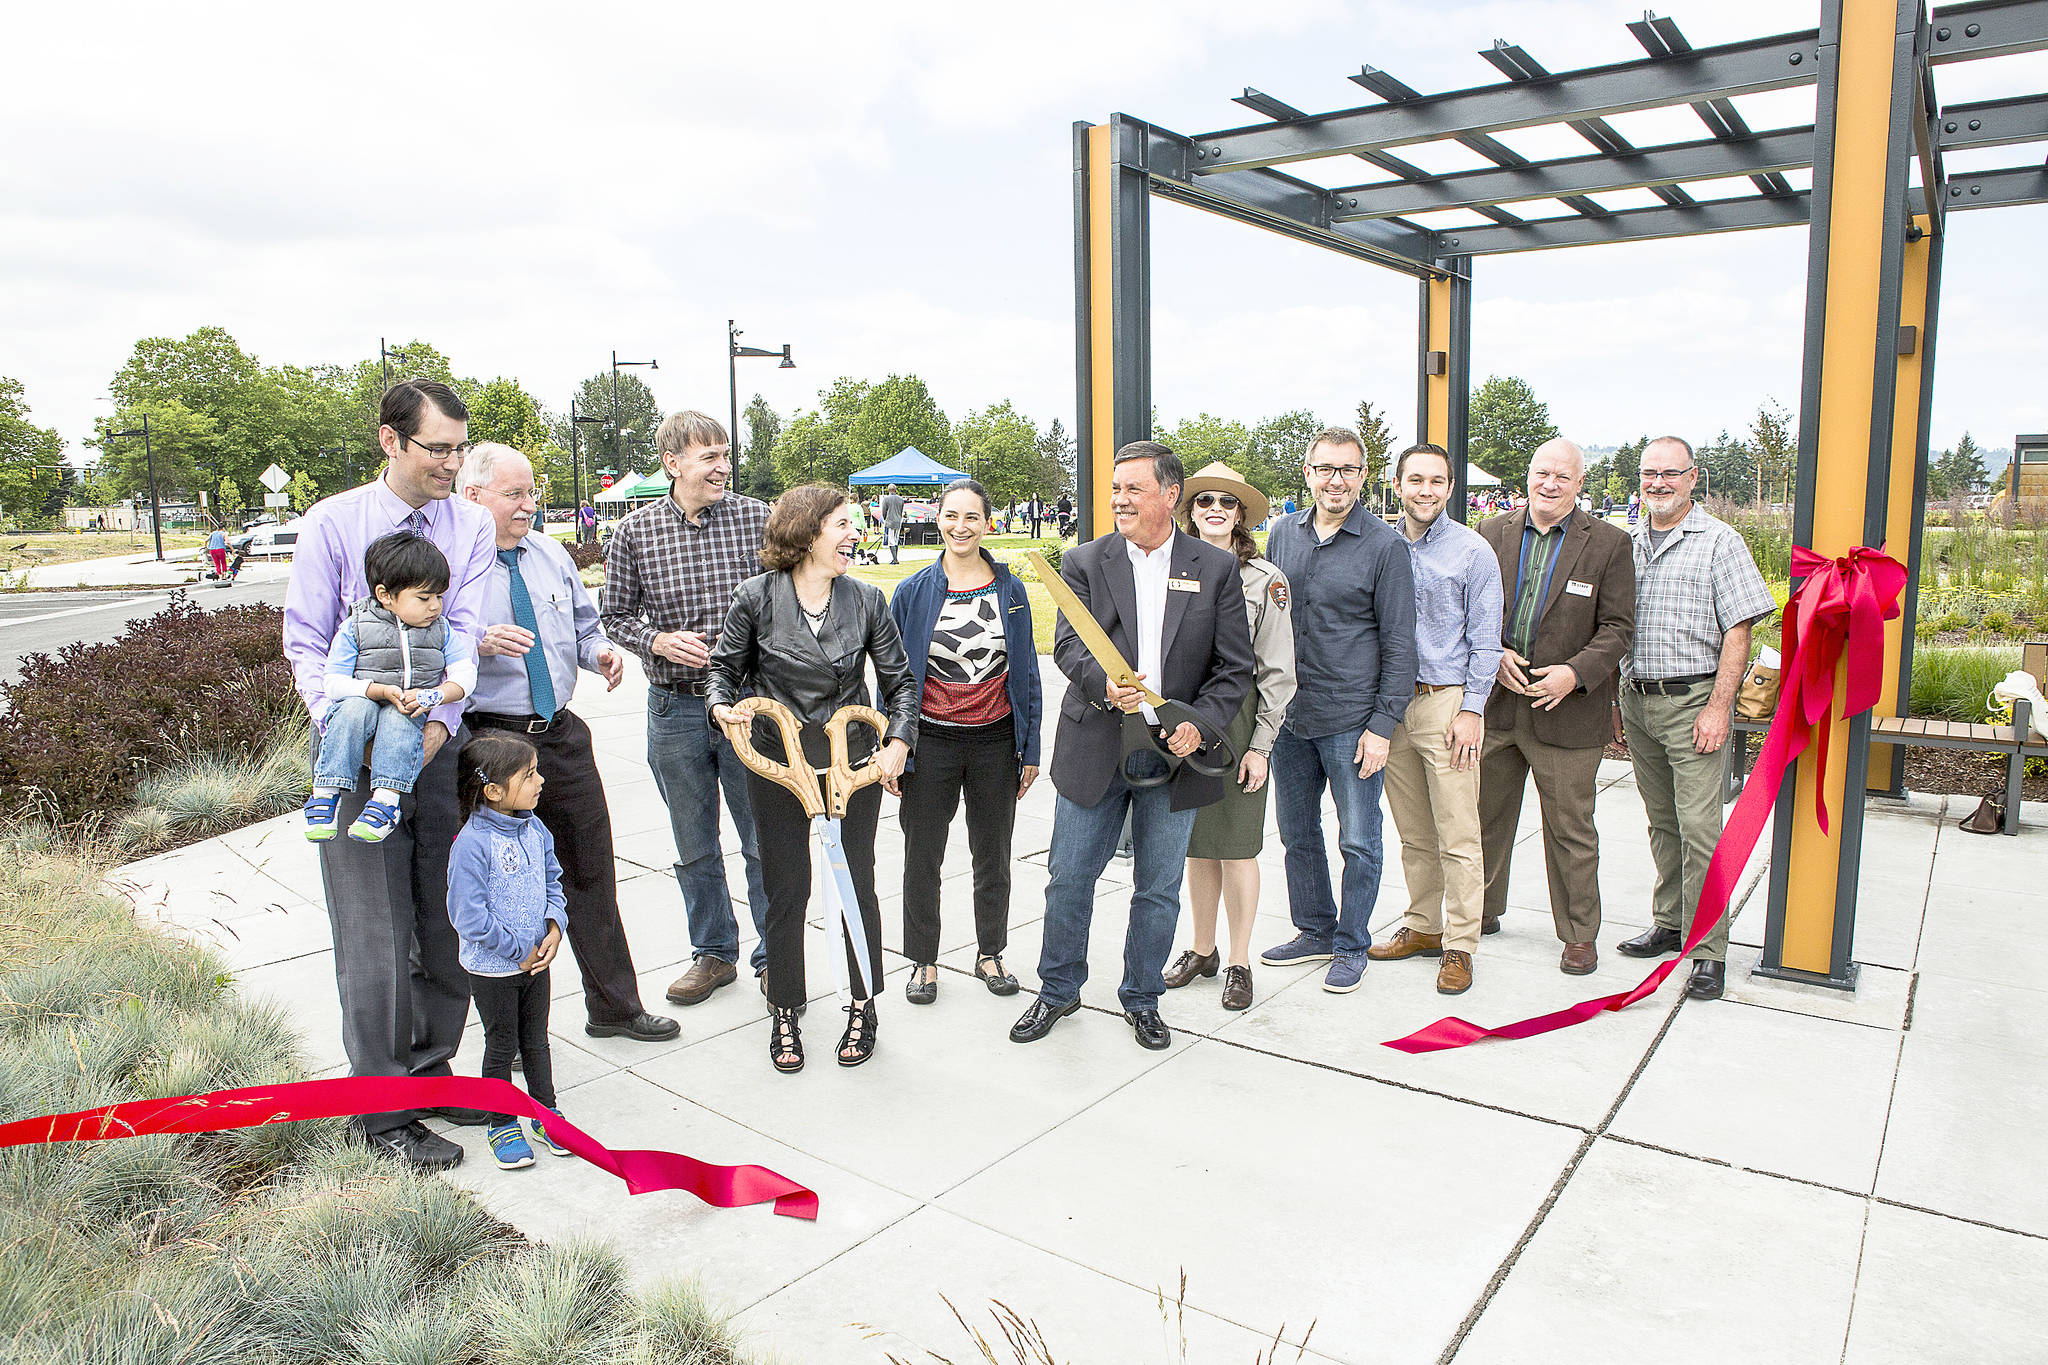 The city of Renton celebrated the completion of phase one at the Sunset Park Saturday. Photos courtesy city of Renton